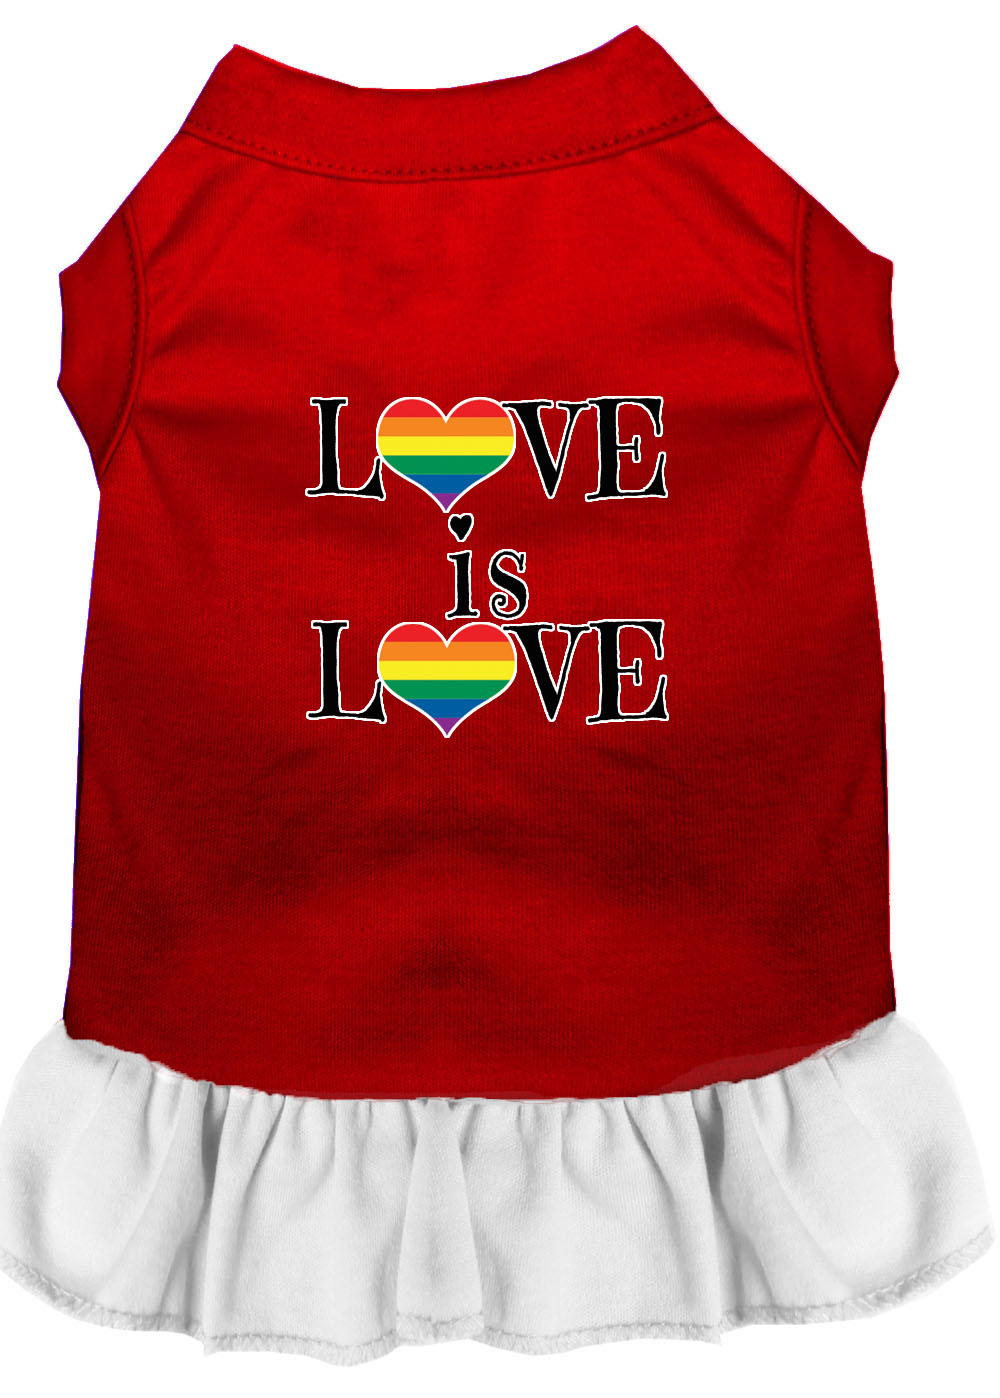 Love is Love Screen Print Dog Dress Red with White Med